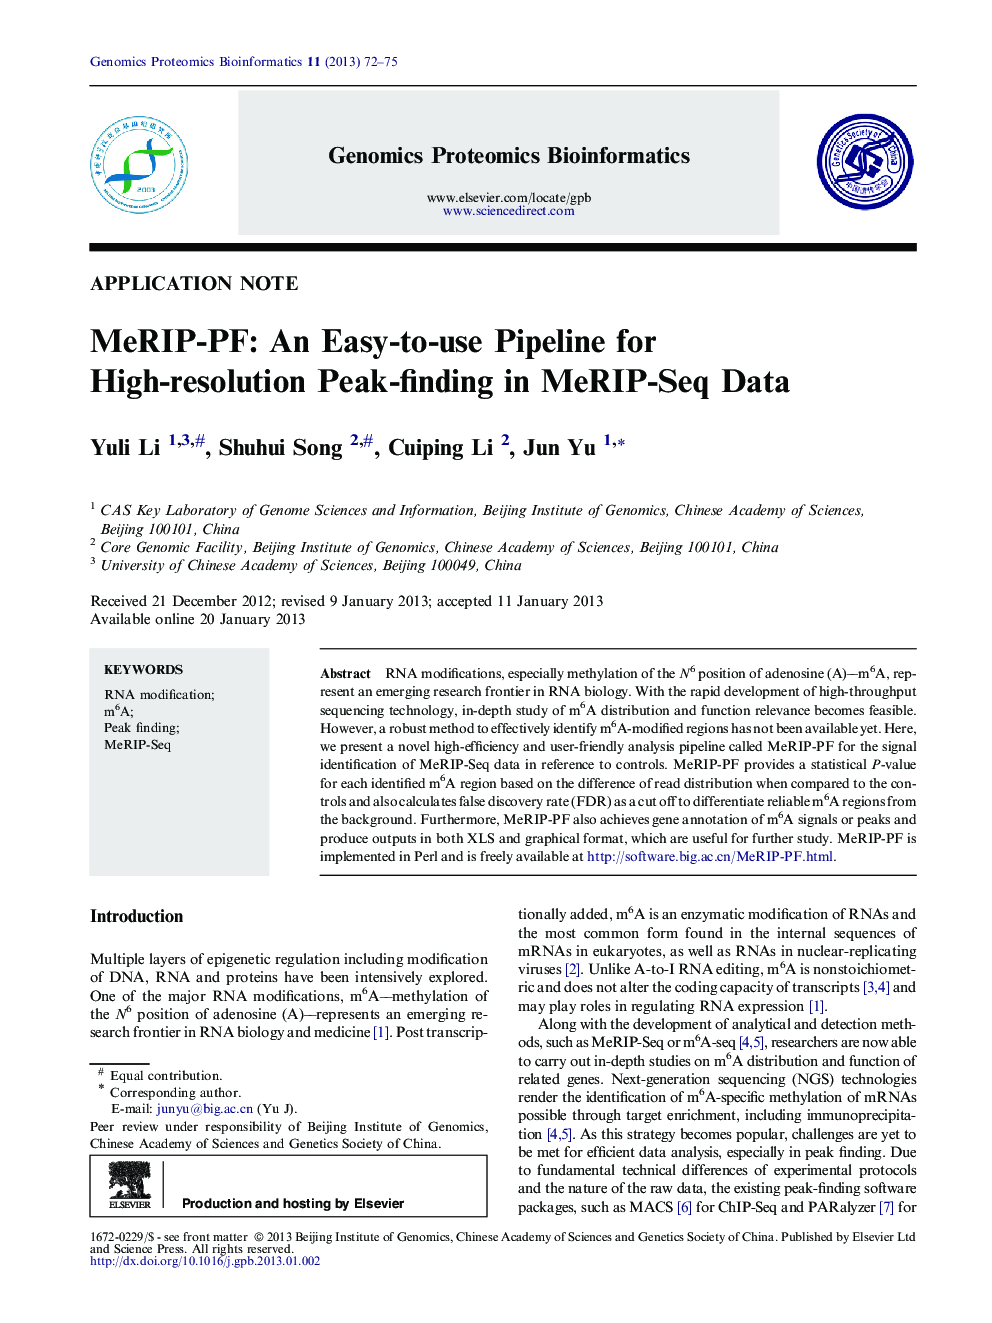 MeRIP-PF: An Easy-to-use Pipeline for High-resolution Peak-finding in MeRIP-Seq Data 